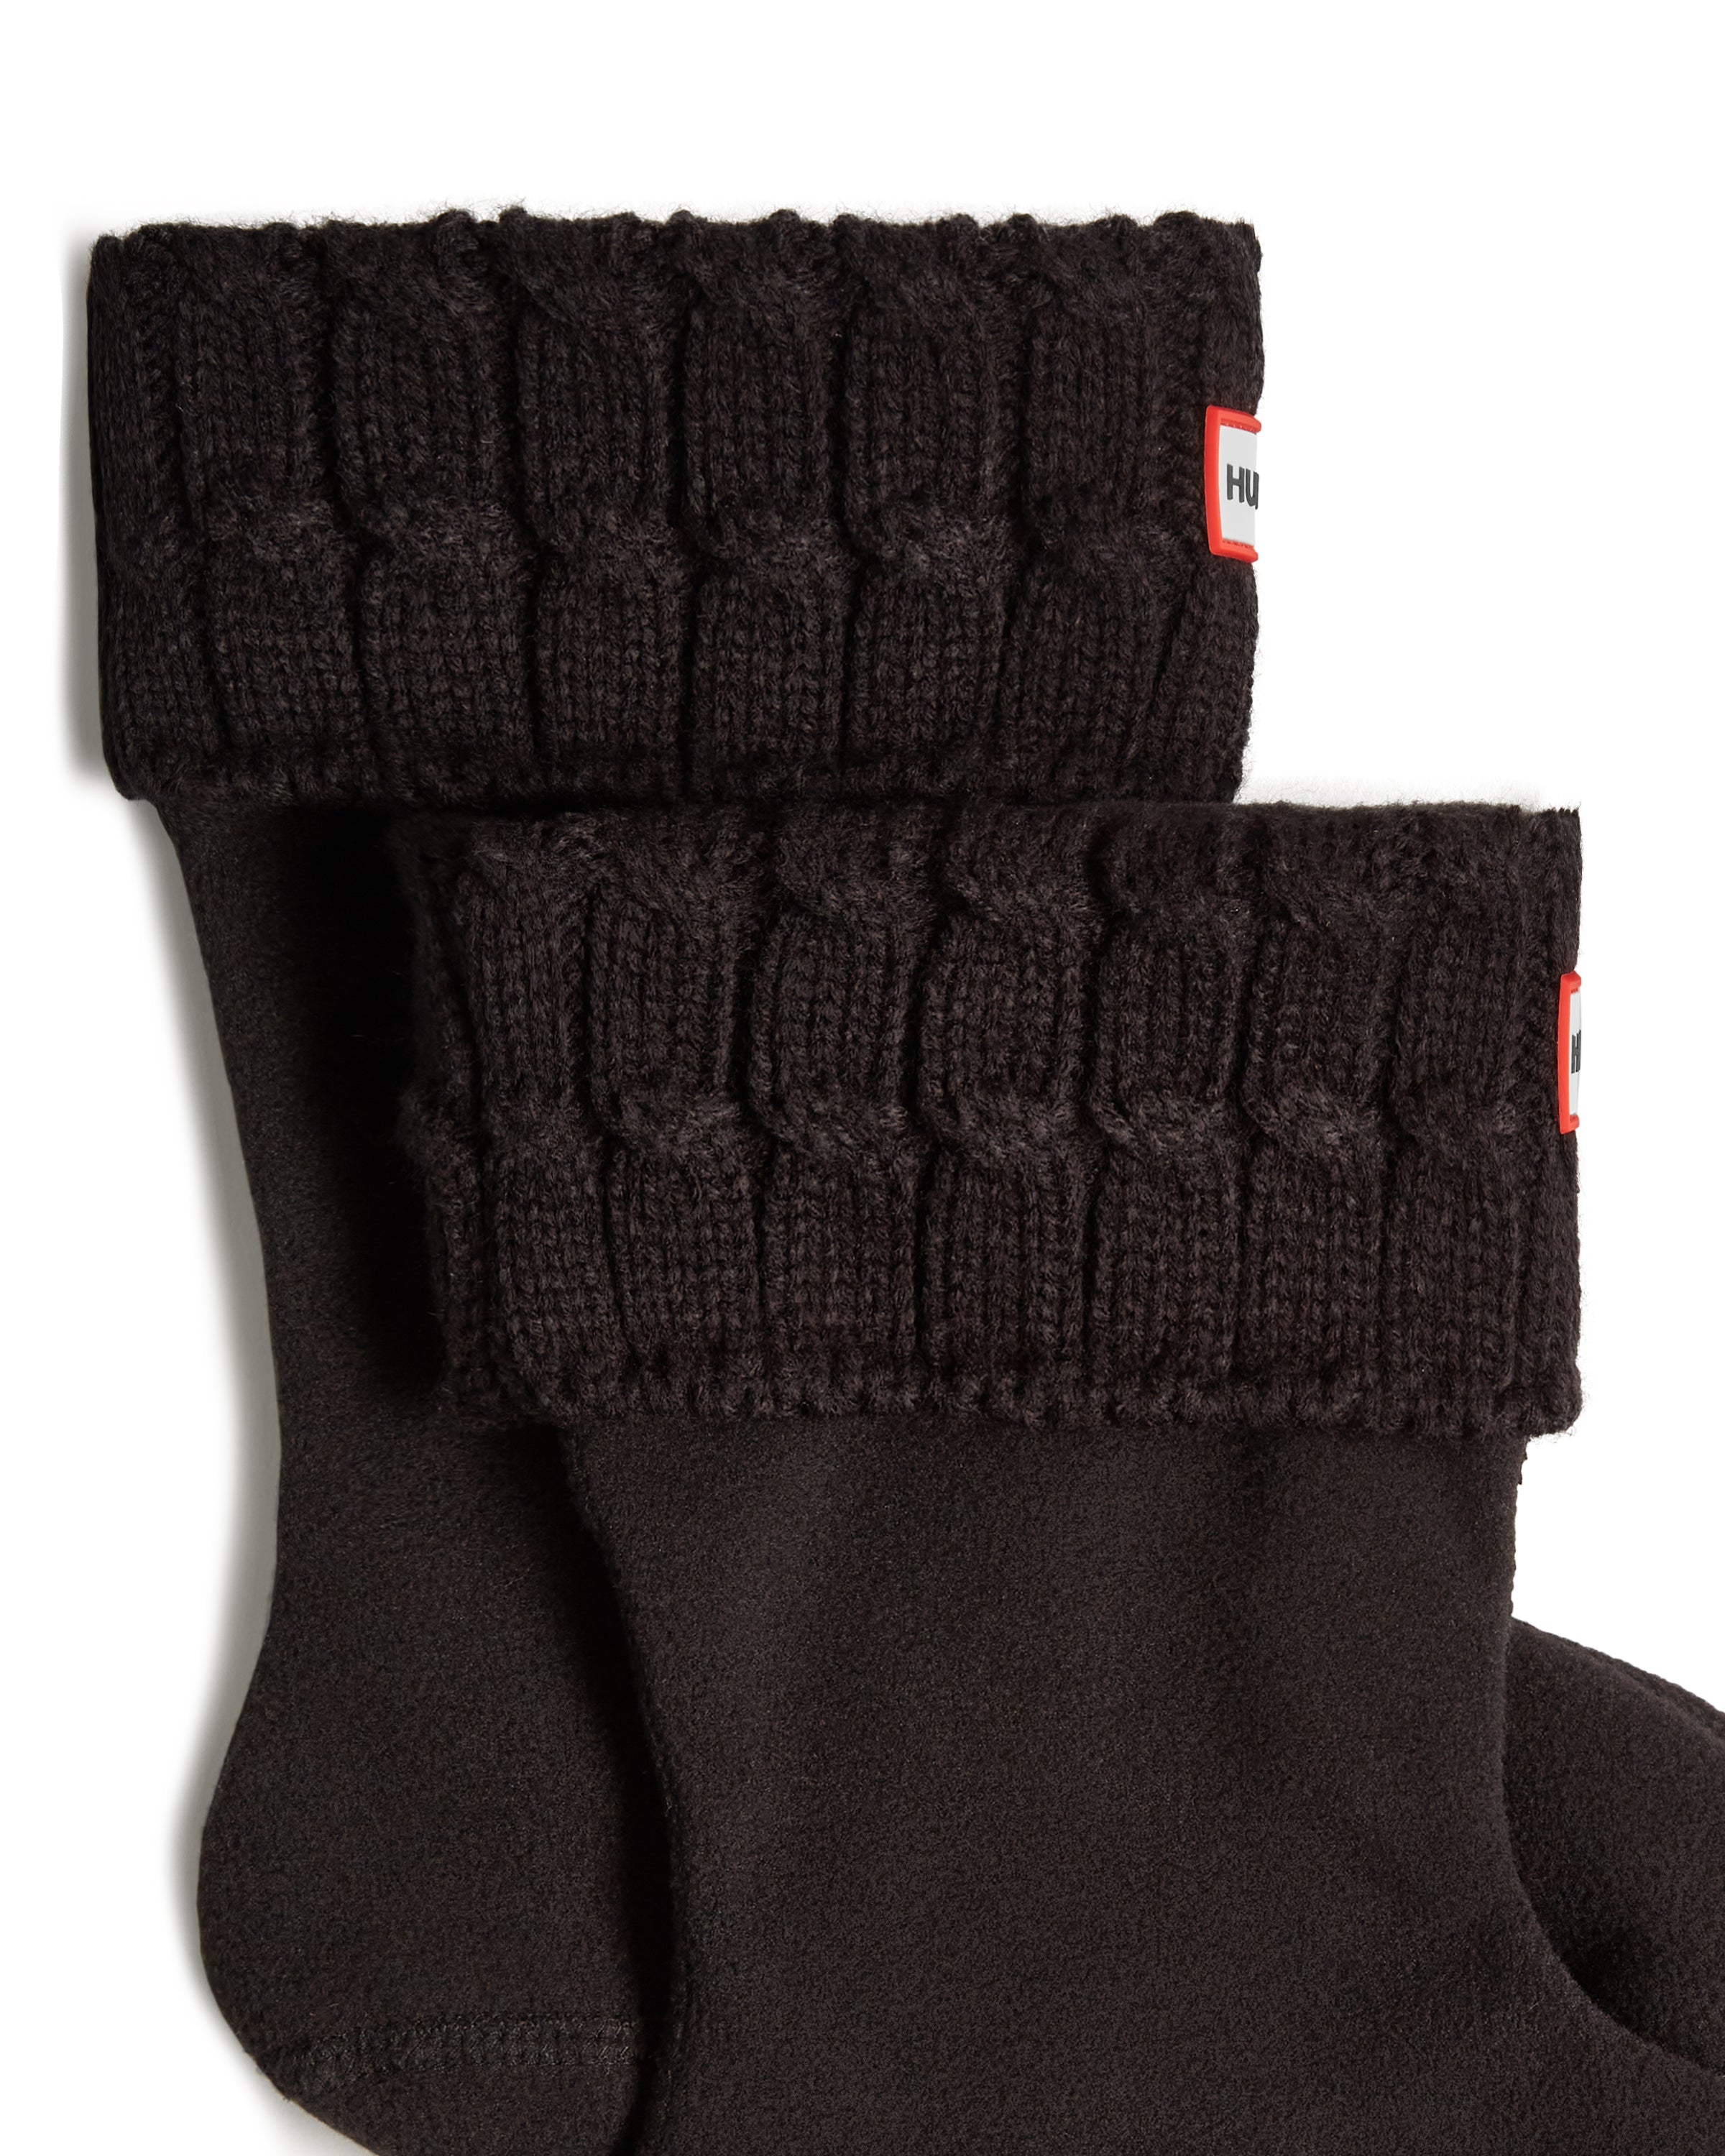 Recycled 6-Stitch Cable Cuff Short Boot Socks - Black